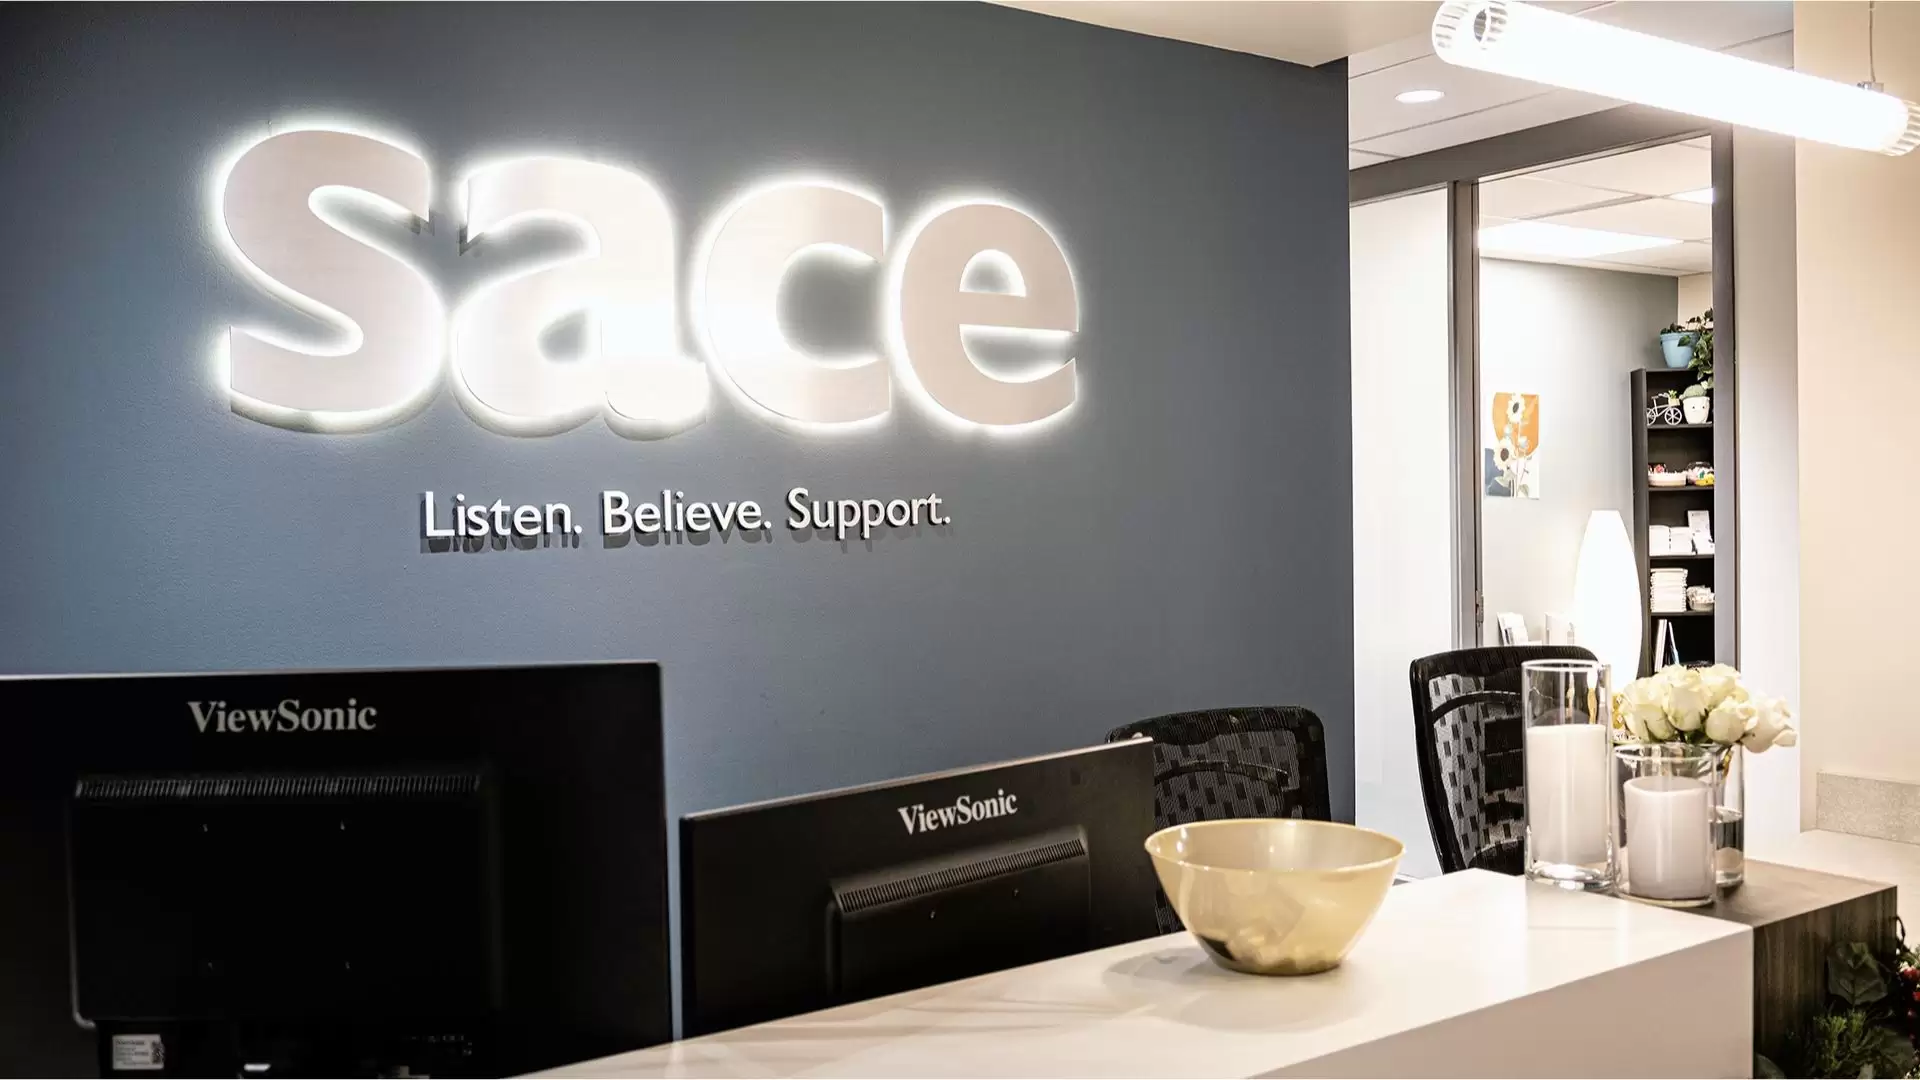 SACE office reception desk with a dark blue painted wall and backlit SACE sign with "Listen. Believe. Support." sign below. Two black monitors and two black office chairs are behind the desk. Candles and white flowers sit on the middle of the desk in glass containers. An office can be seen beyond the front desk.